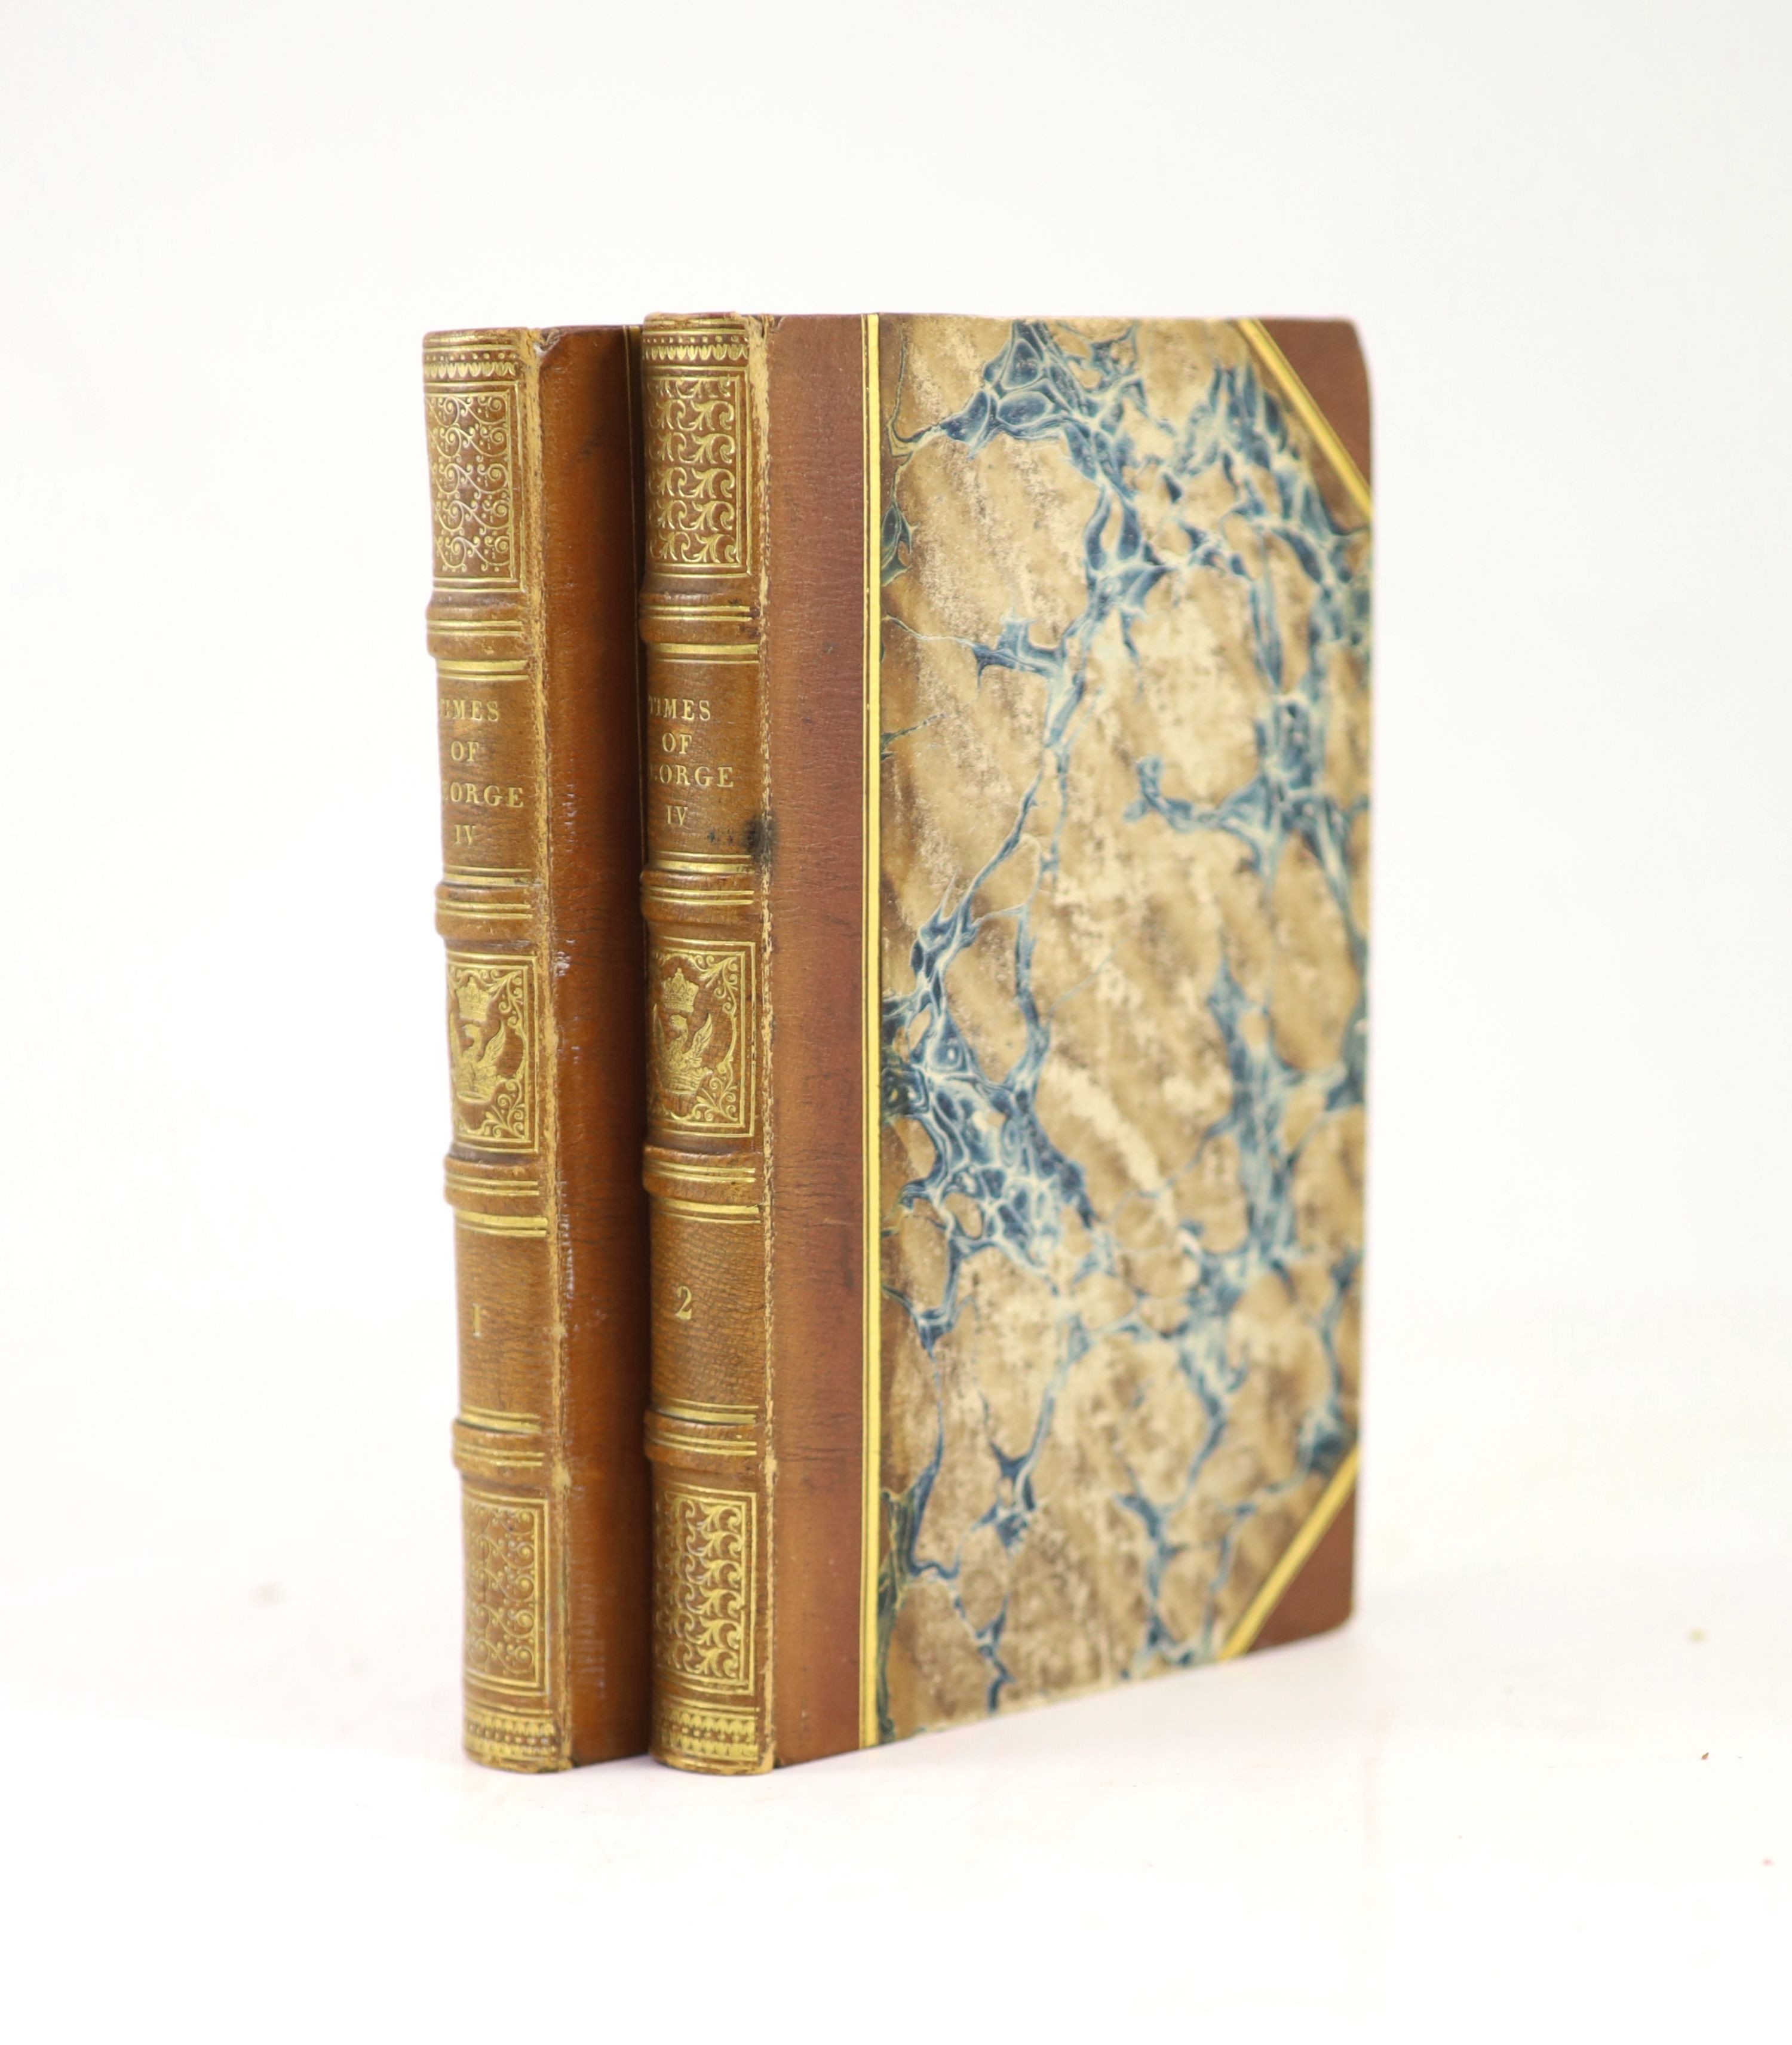 Anon [Lady Charlotte Campbell Bury] - Diary Illustrative of the times of George the Fourth... 2 Vols half gilt panelled calf and marbled paper, decoratively gilt spines with letters direct. Marbled edge and end papers. A